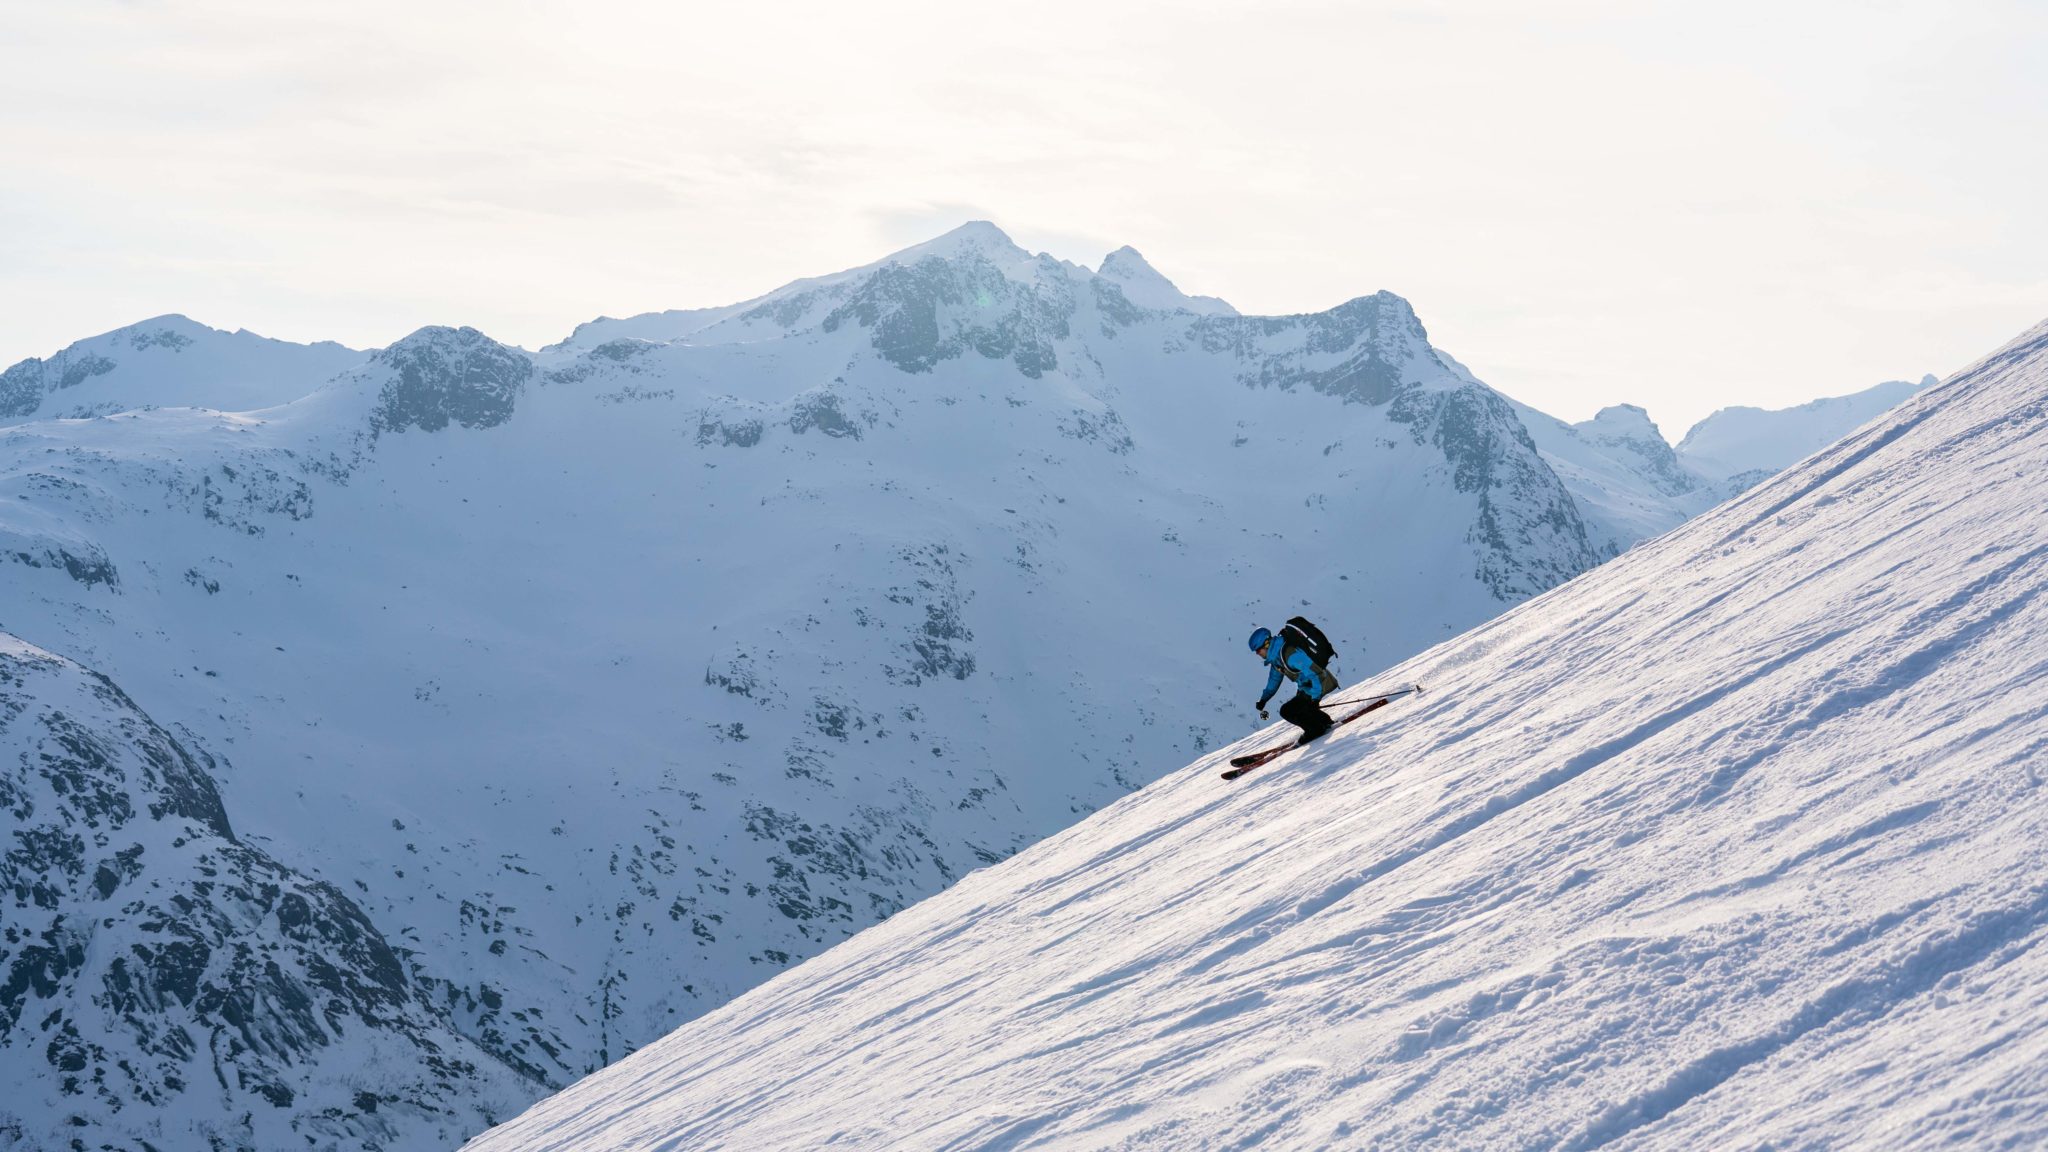 During a ski holiday in Troms you can ski big mountains, entertaining forest and everything in between. Photo: Lars Petter Jonassen / nordnorge.com